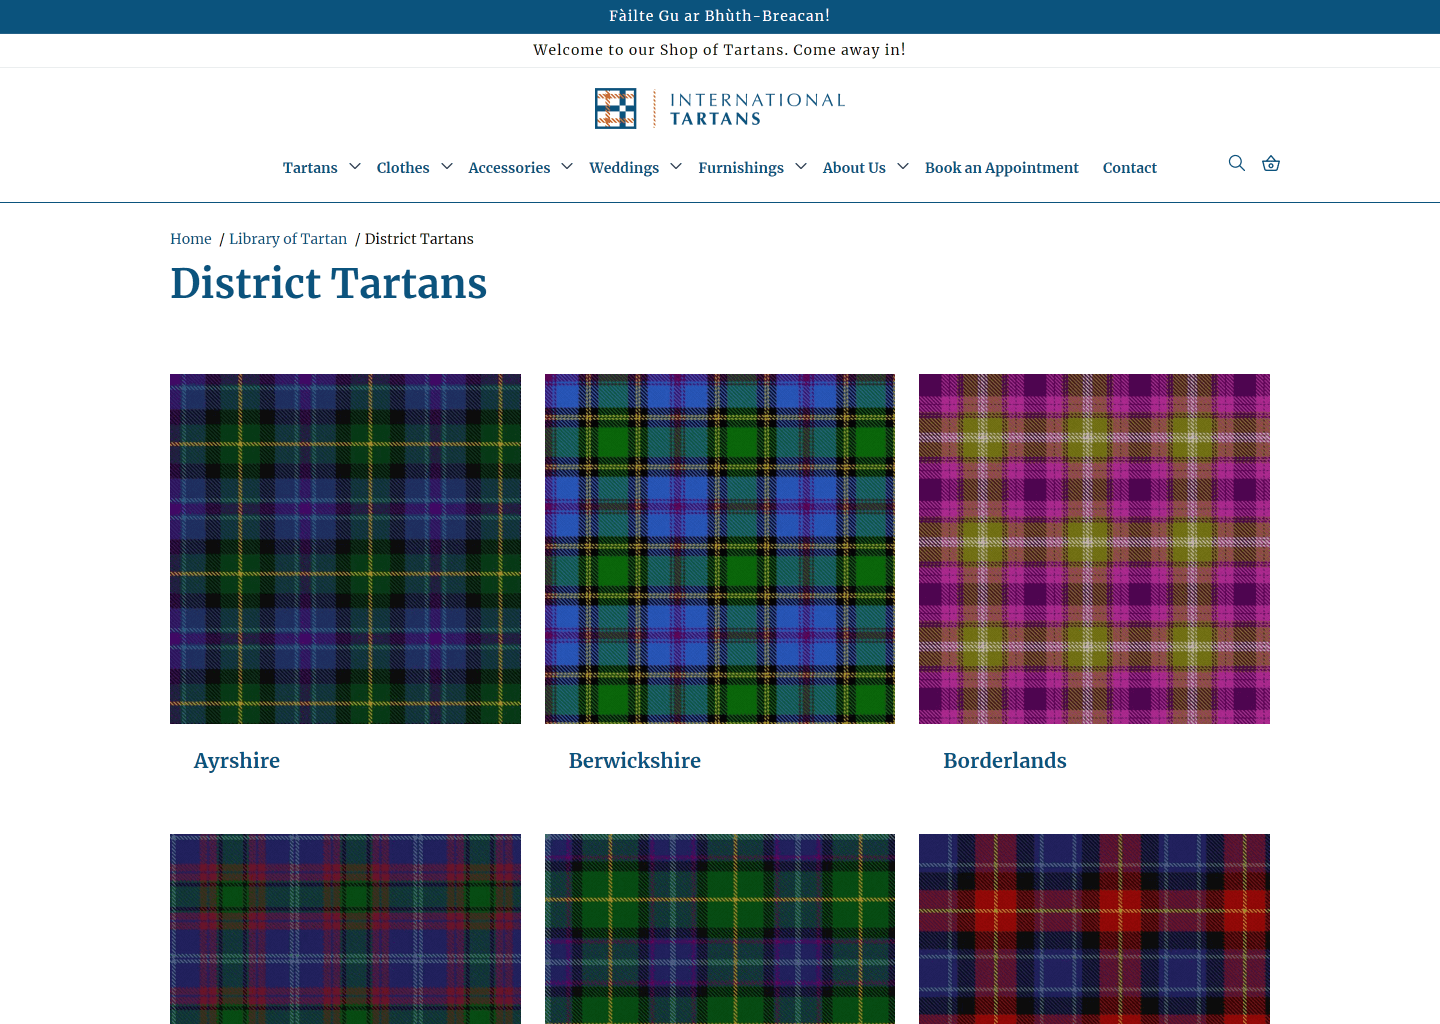 'District Tartans' page after the redesign